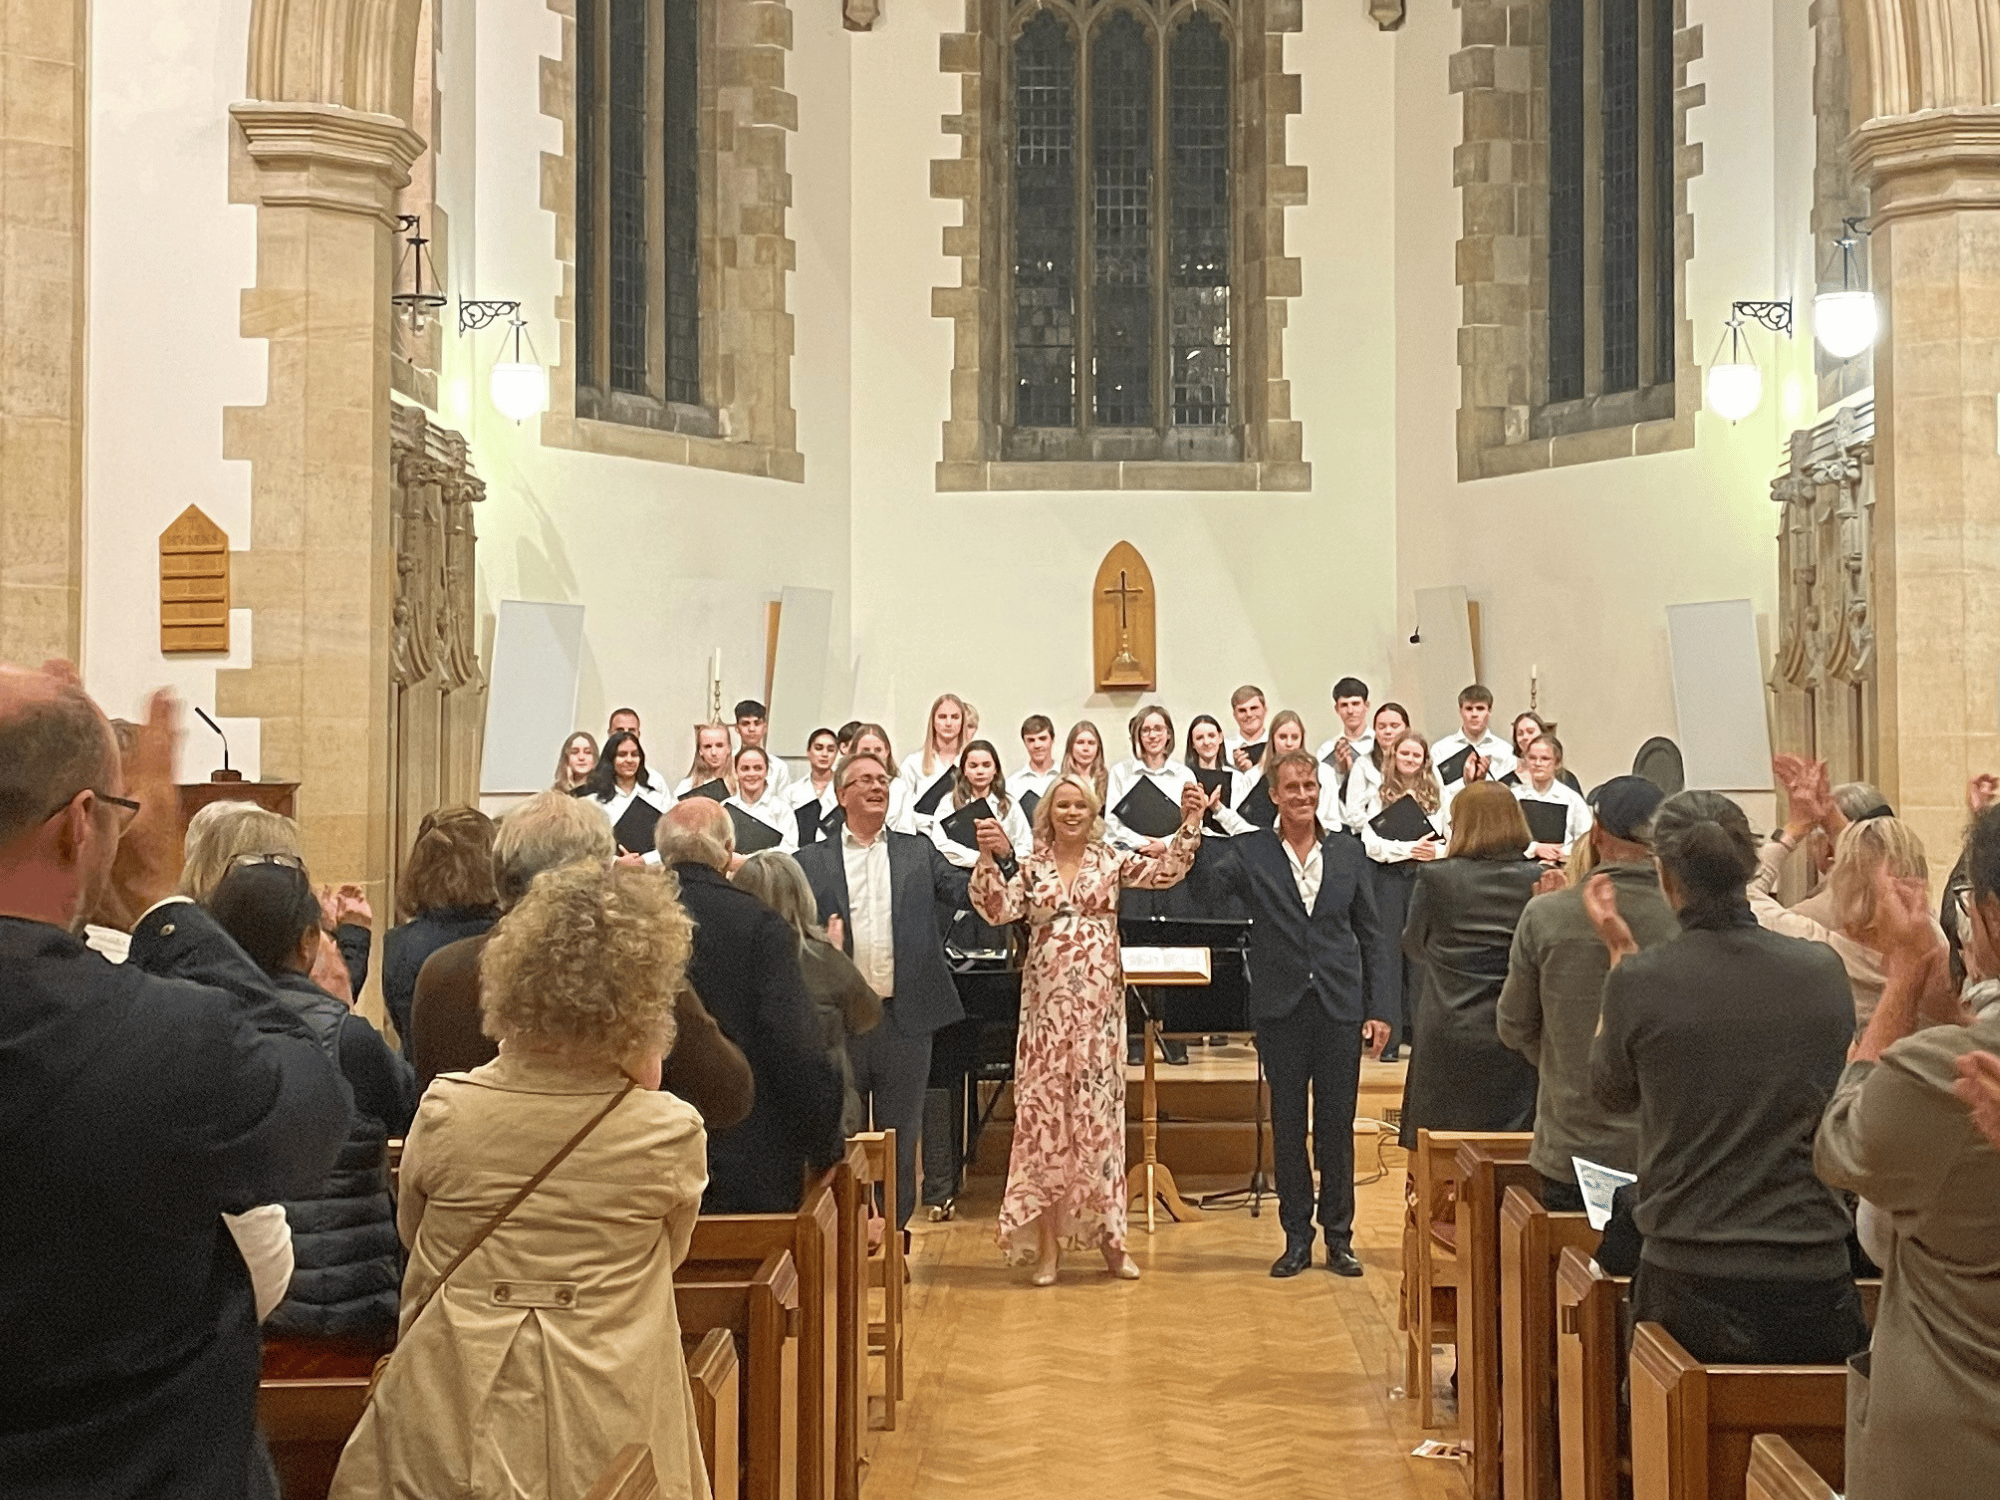 A concert of two singers and a pianist who are bowing and a choir in the background